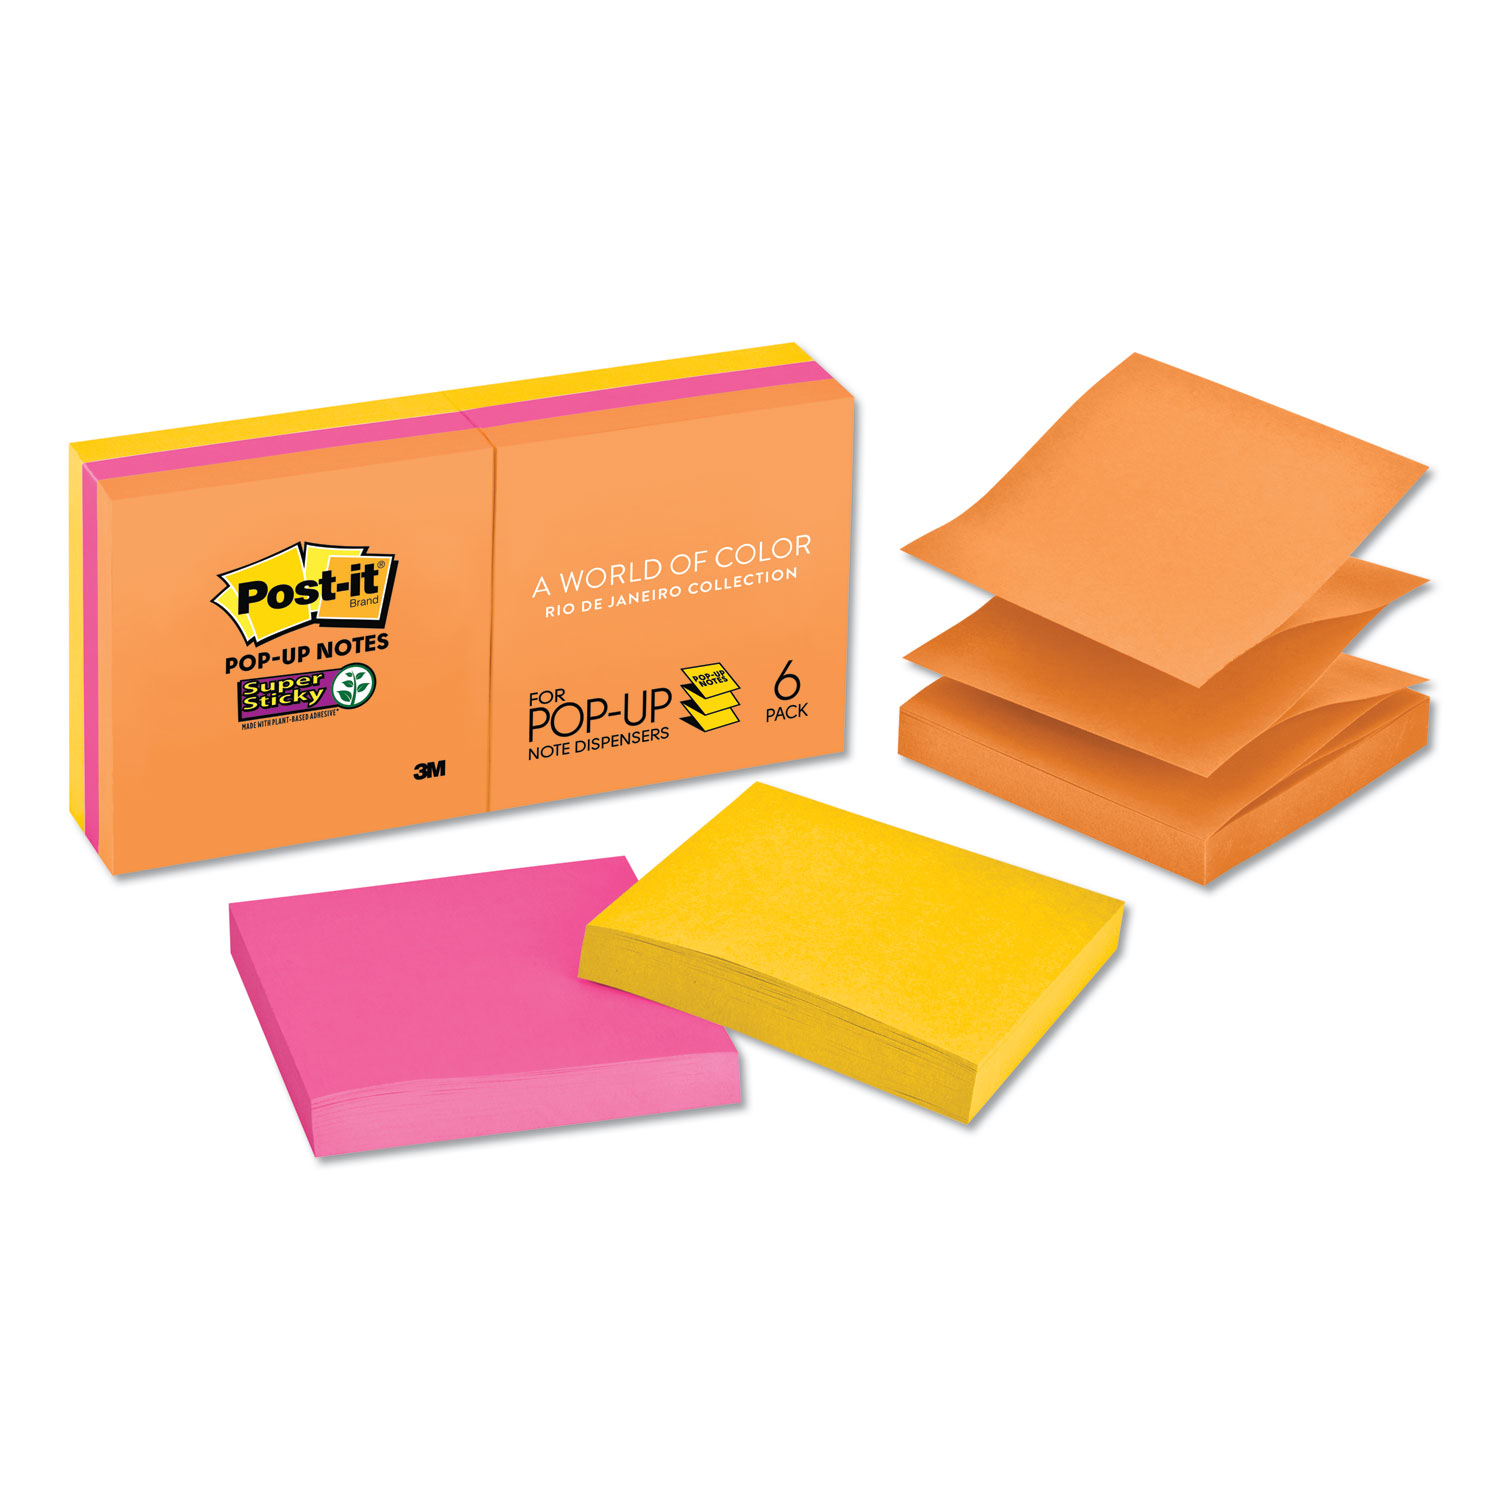  Post-it Pop-up Notes Super Sticky R330-6SSUC Pop-up 3 x 3 Note Refill, Rio de Janeiro, 90 Notes/Pad, 6 Pads/Pack (MMMR3306SSUC) 